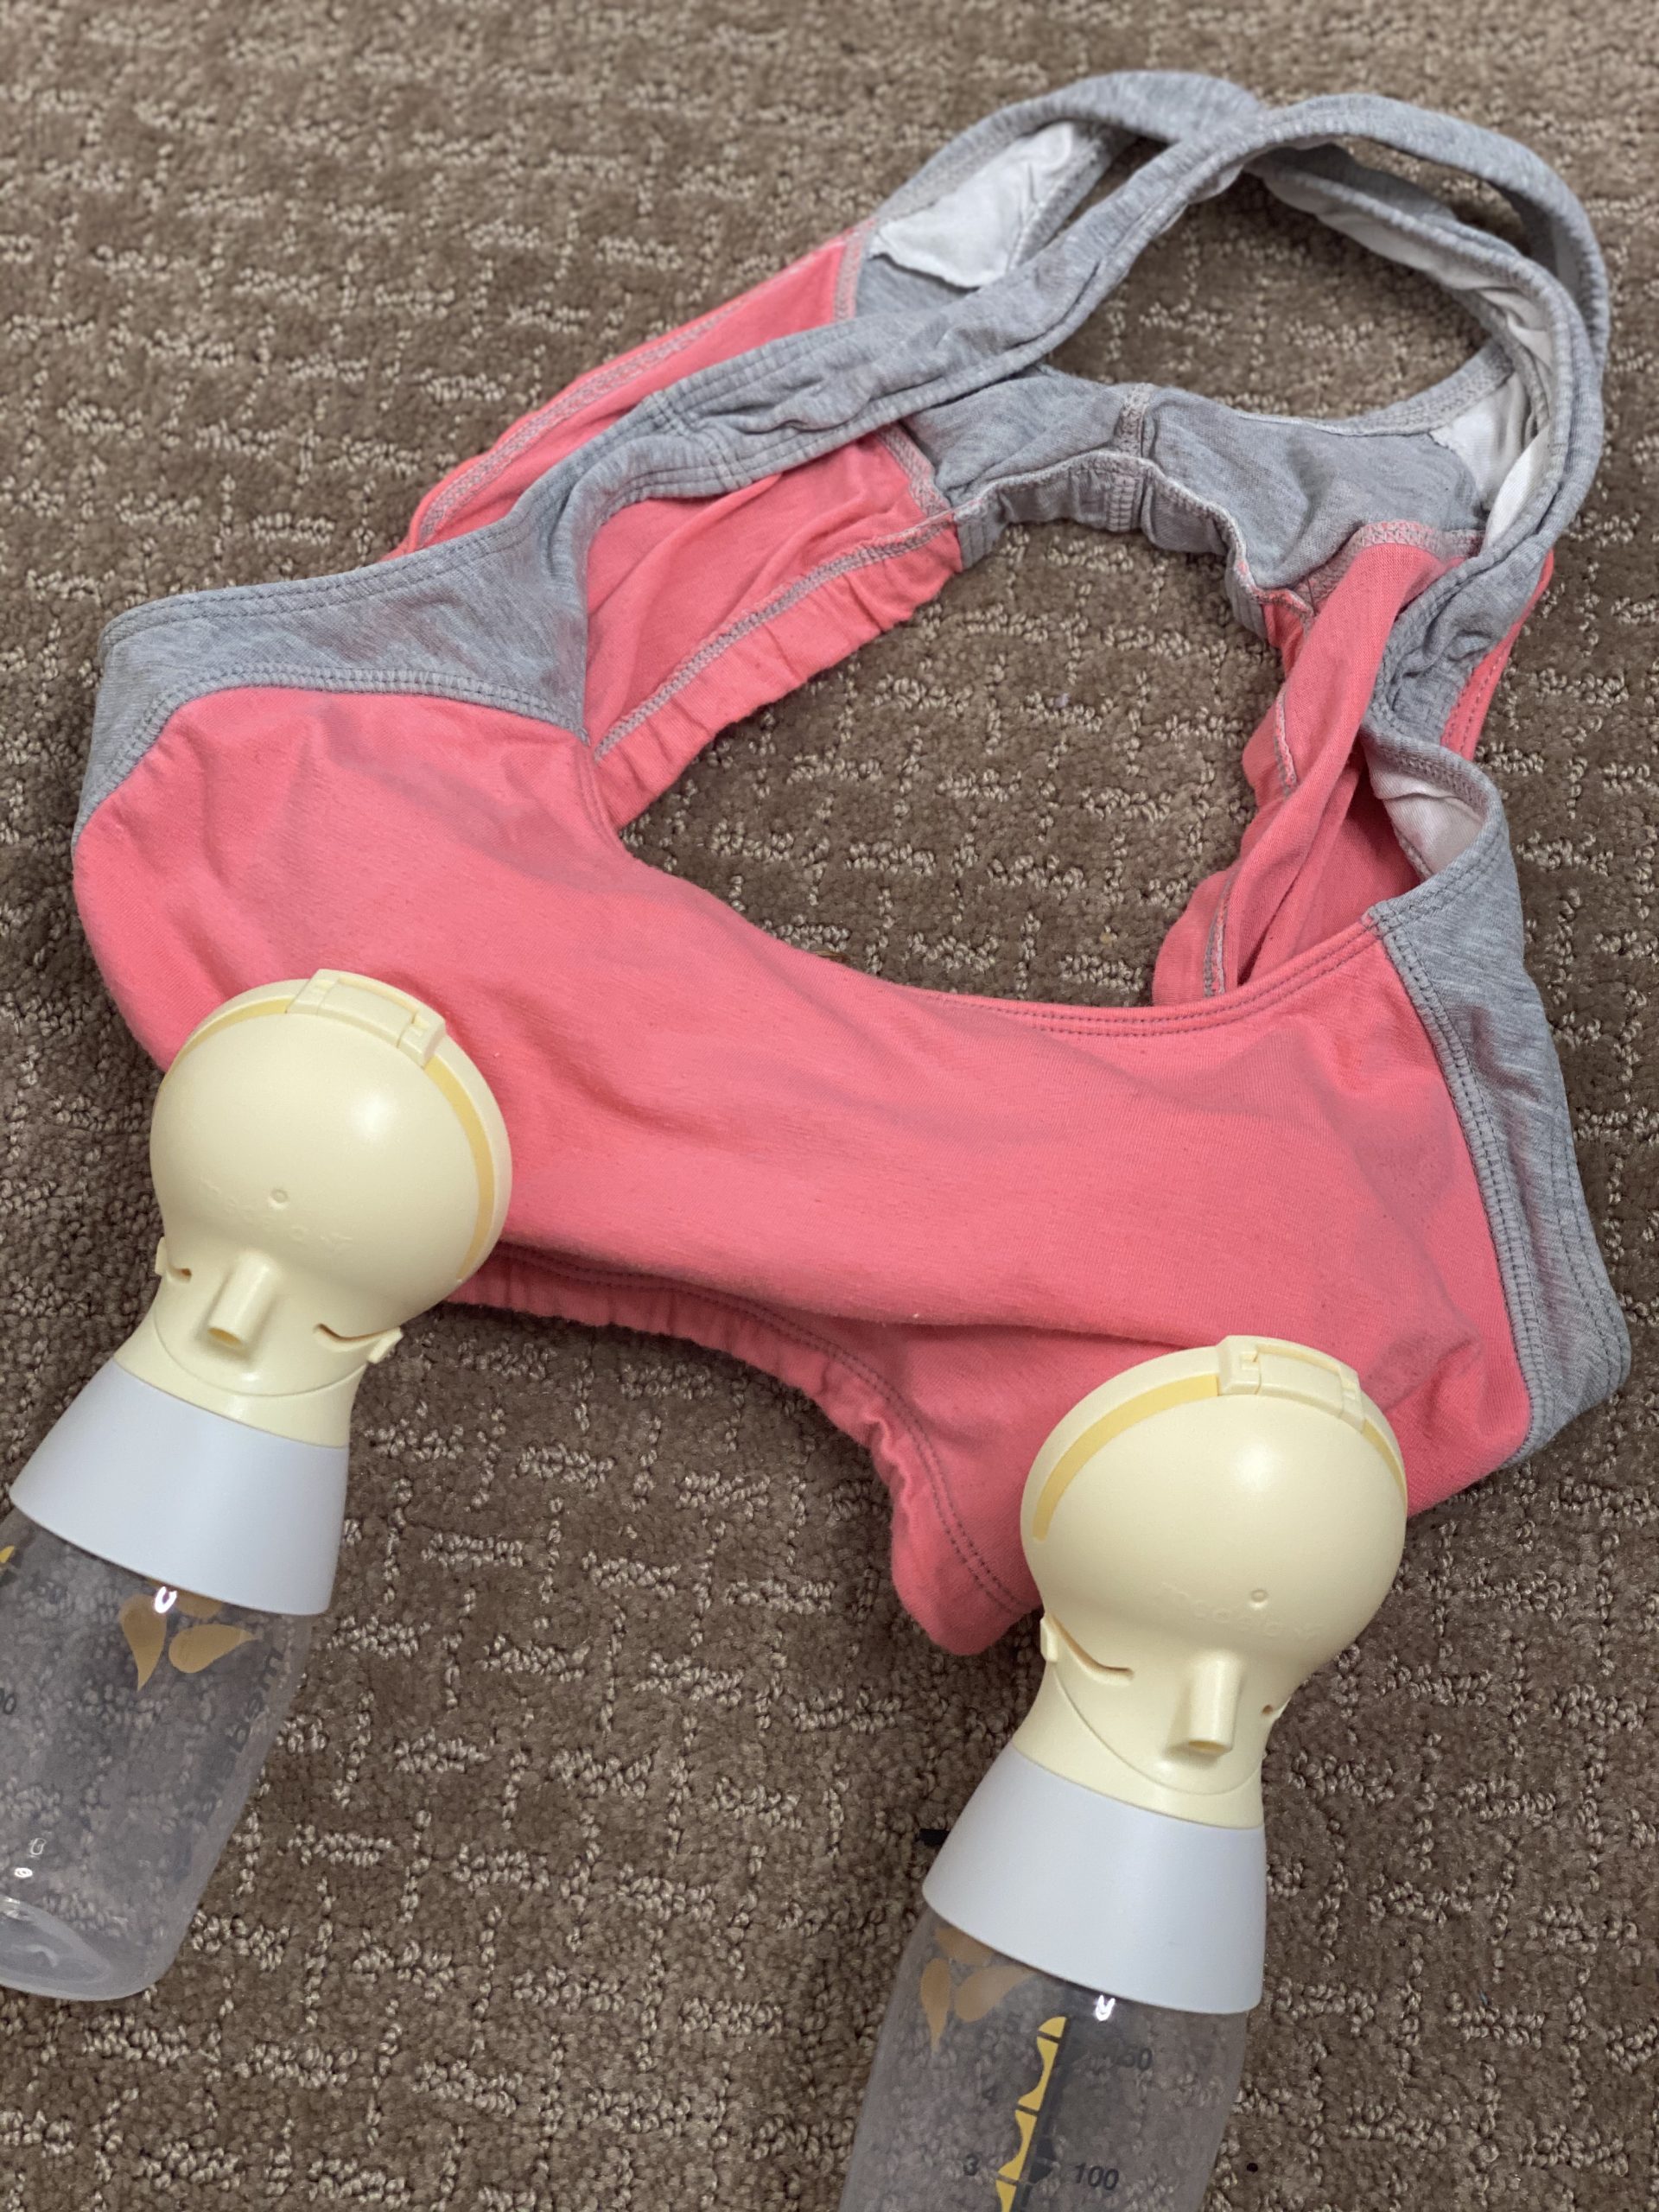 DIY pumping bra with flanges